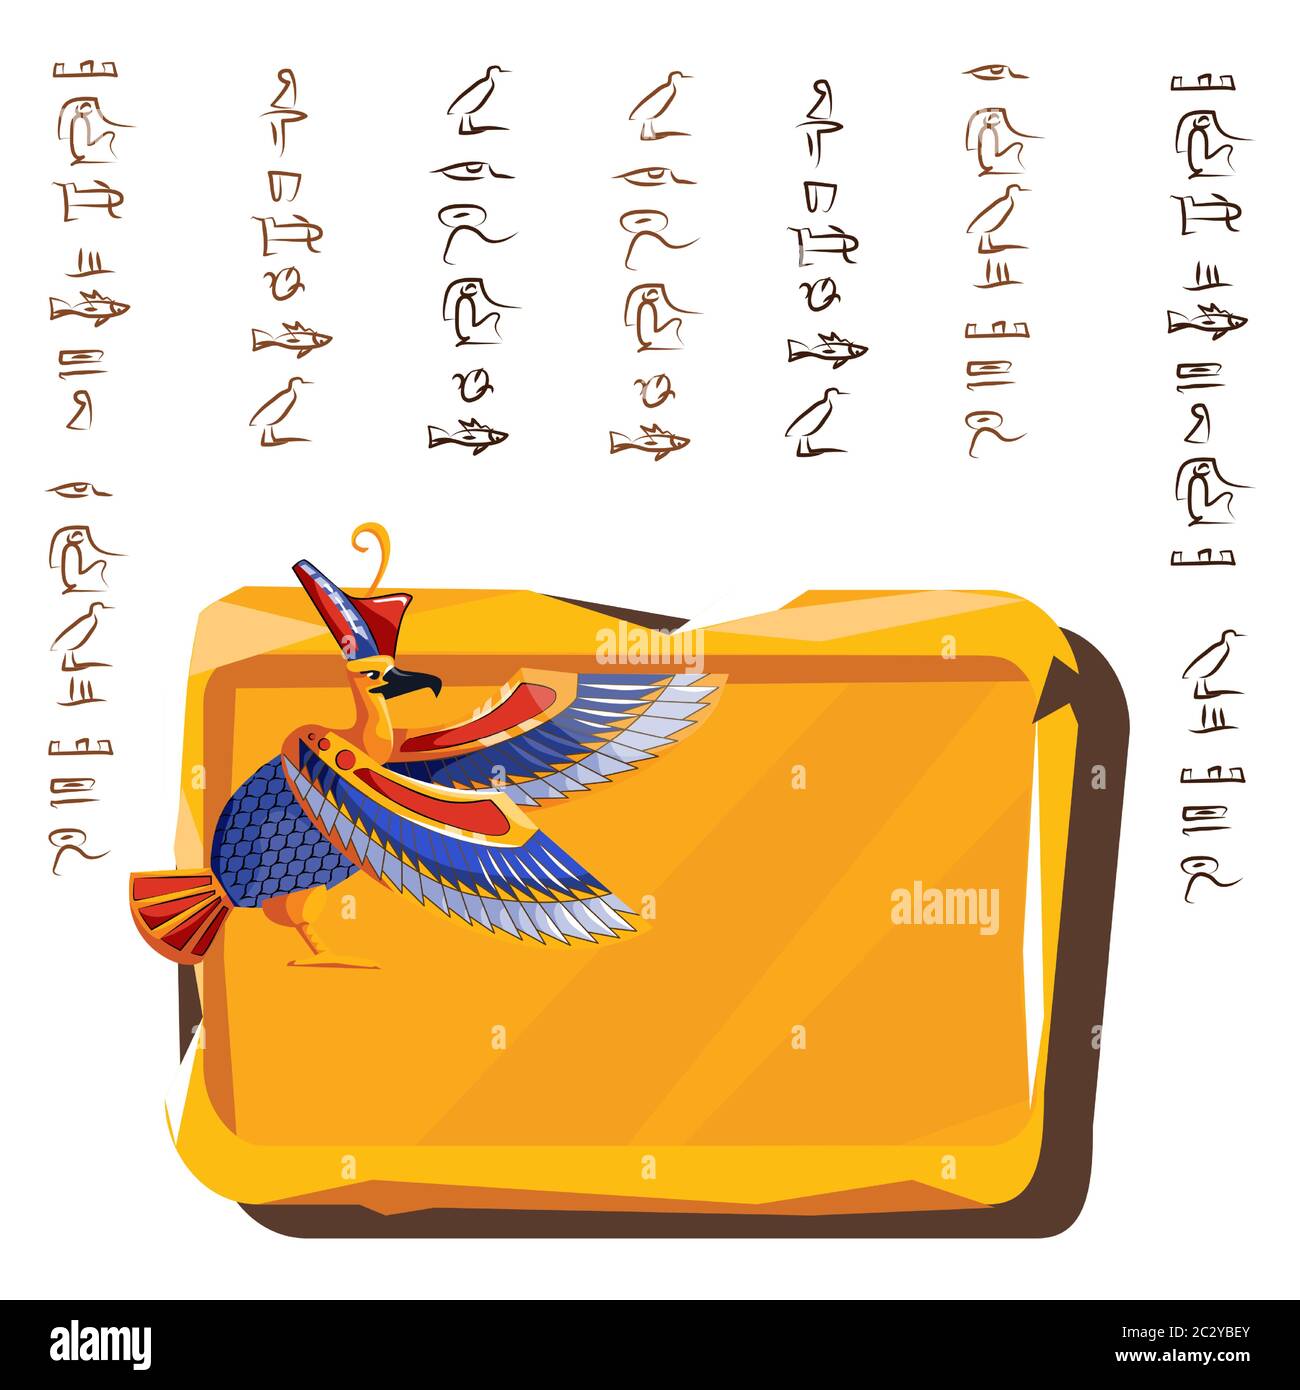 Stone board or clay tablet, falcon and Egyptian hieroglyphs cartoons vector illustration Ancient object for storing information, graphical user interf Stock Vector